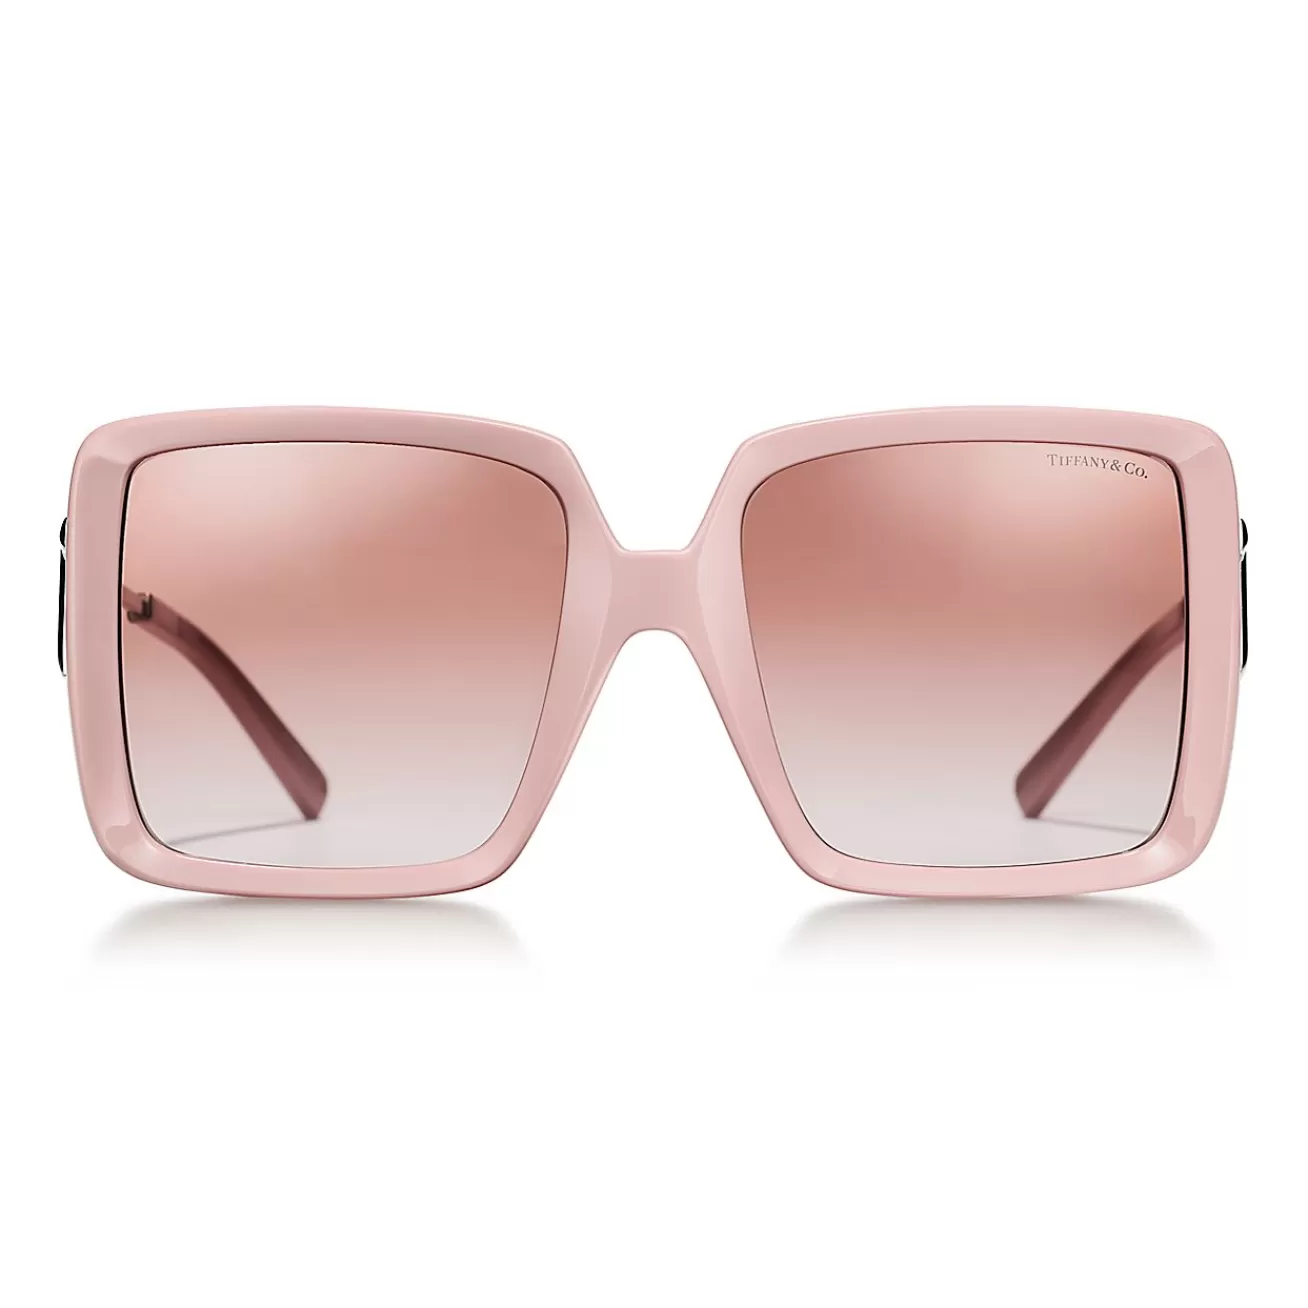 Tiffany & Co. Tiffany T Sunglasses in Pink Acetate with Pink Gradient Lenses | ^Women Tiffany T | Sunglasses